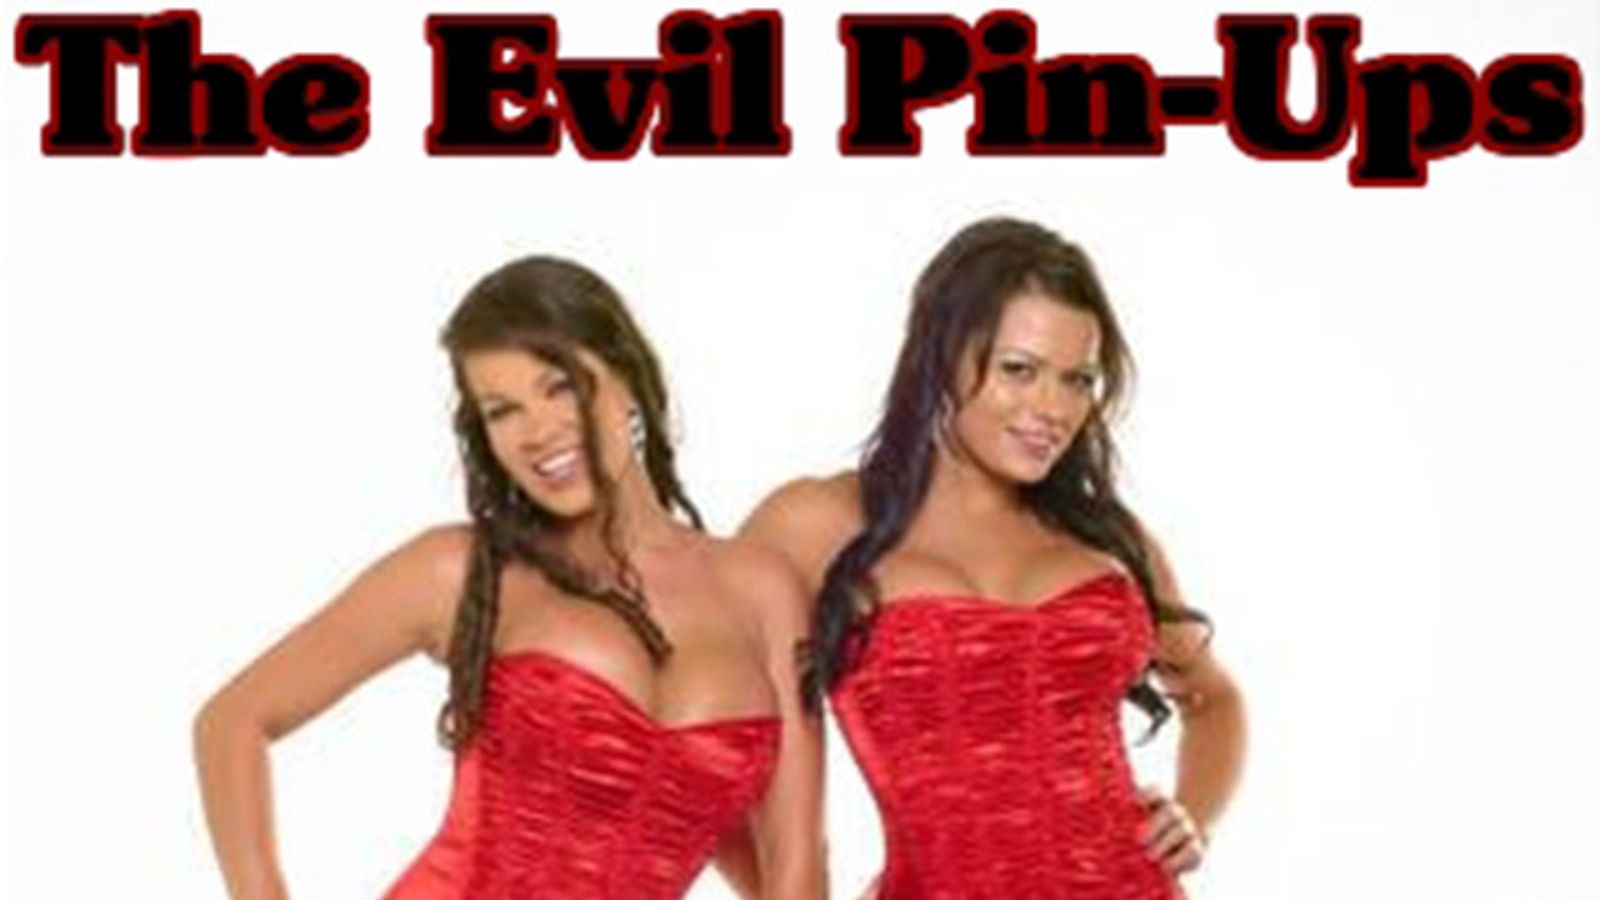 XXX Stars 'Evil Pinups' Headline at The Gold Club in Philly